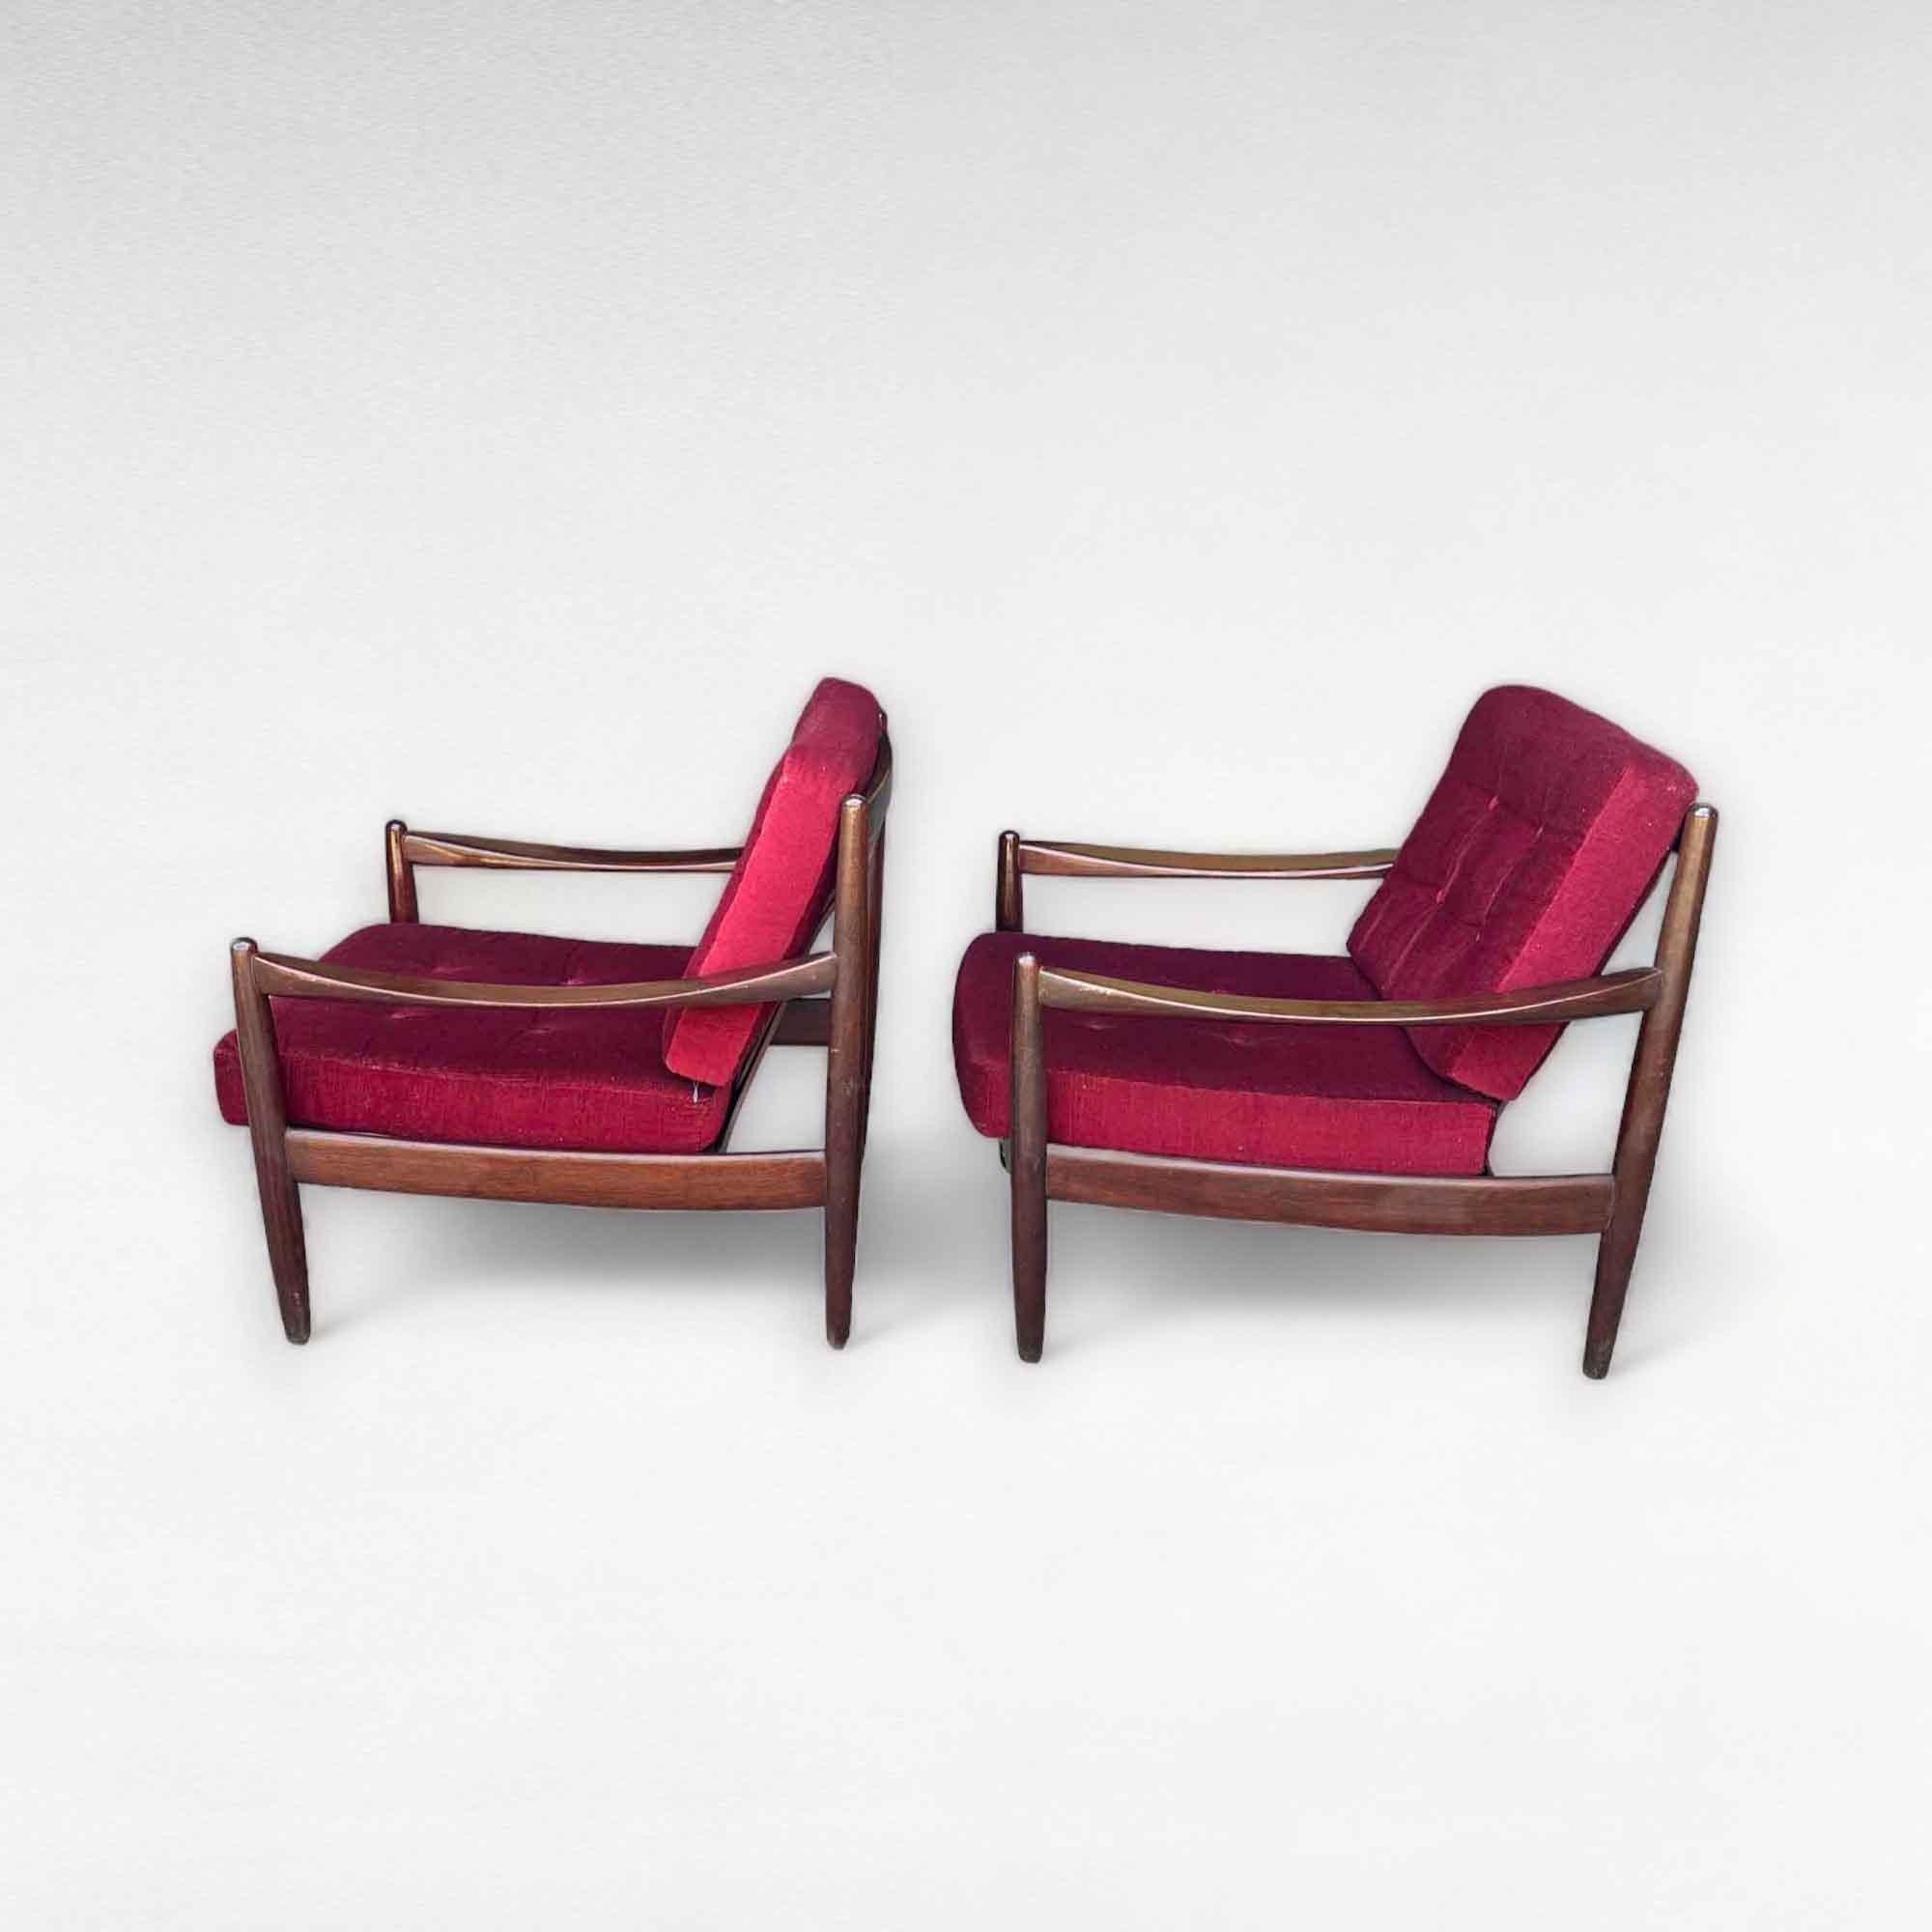 Set of Danish seats from the 1960s by Grete Jalk. This set consists of a 3-seater and 2 separate 1-seater seats. The cushions are in a warm red color and show no stains. The back of the armchairs and armrests have a nice organic shape. These seats